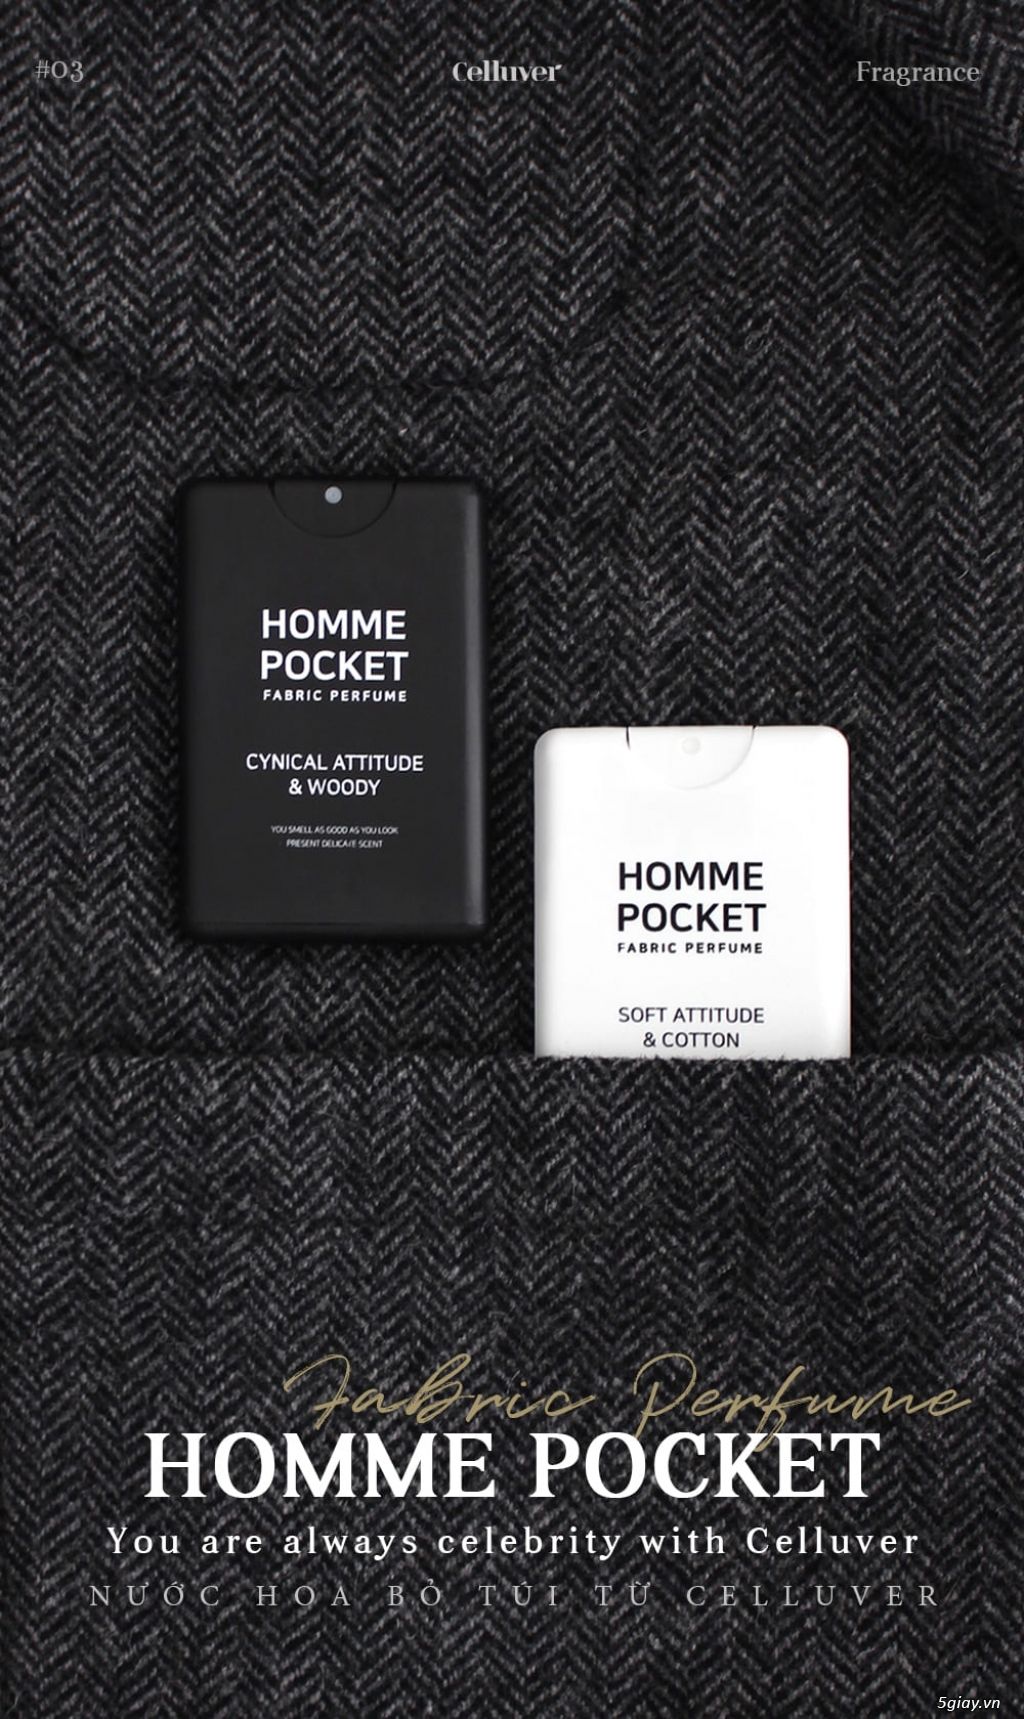 CELLUVER HOMME POCKET CYNICAL ATTITUDE & WOODY 20ML - 14